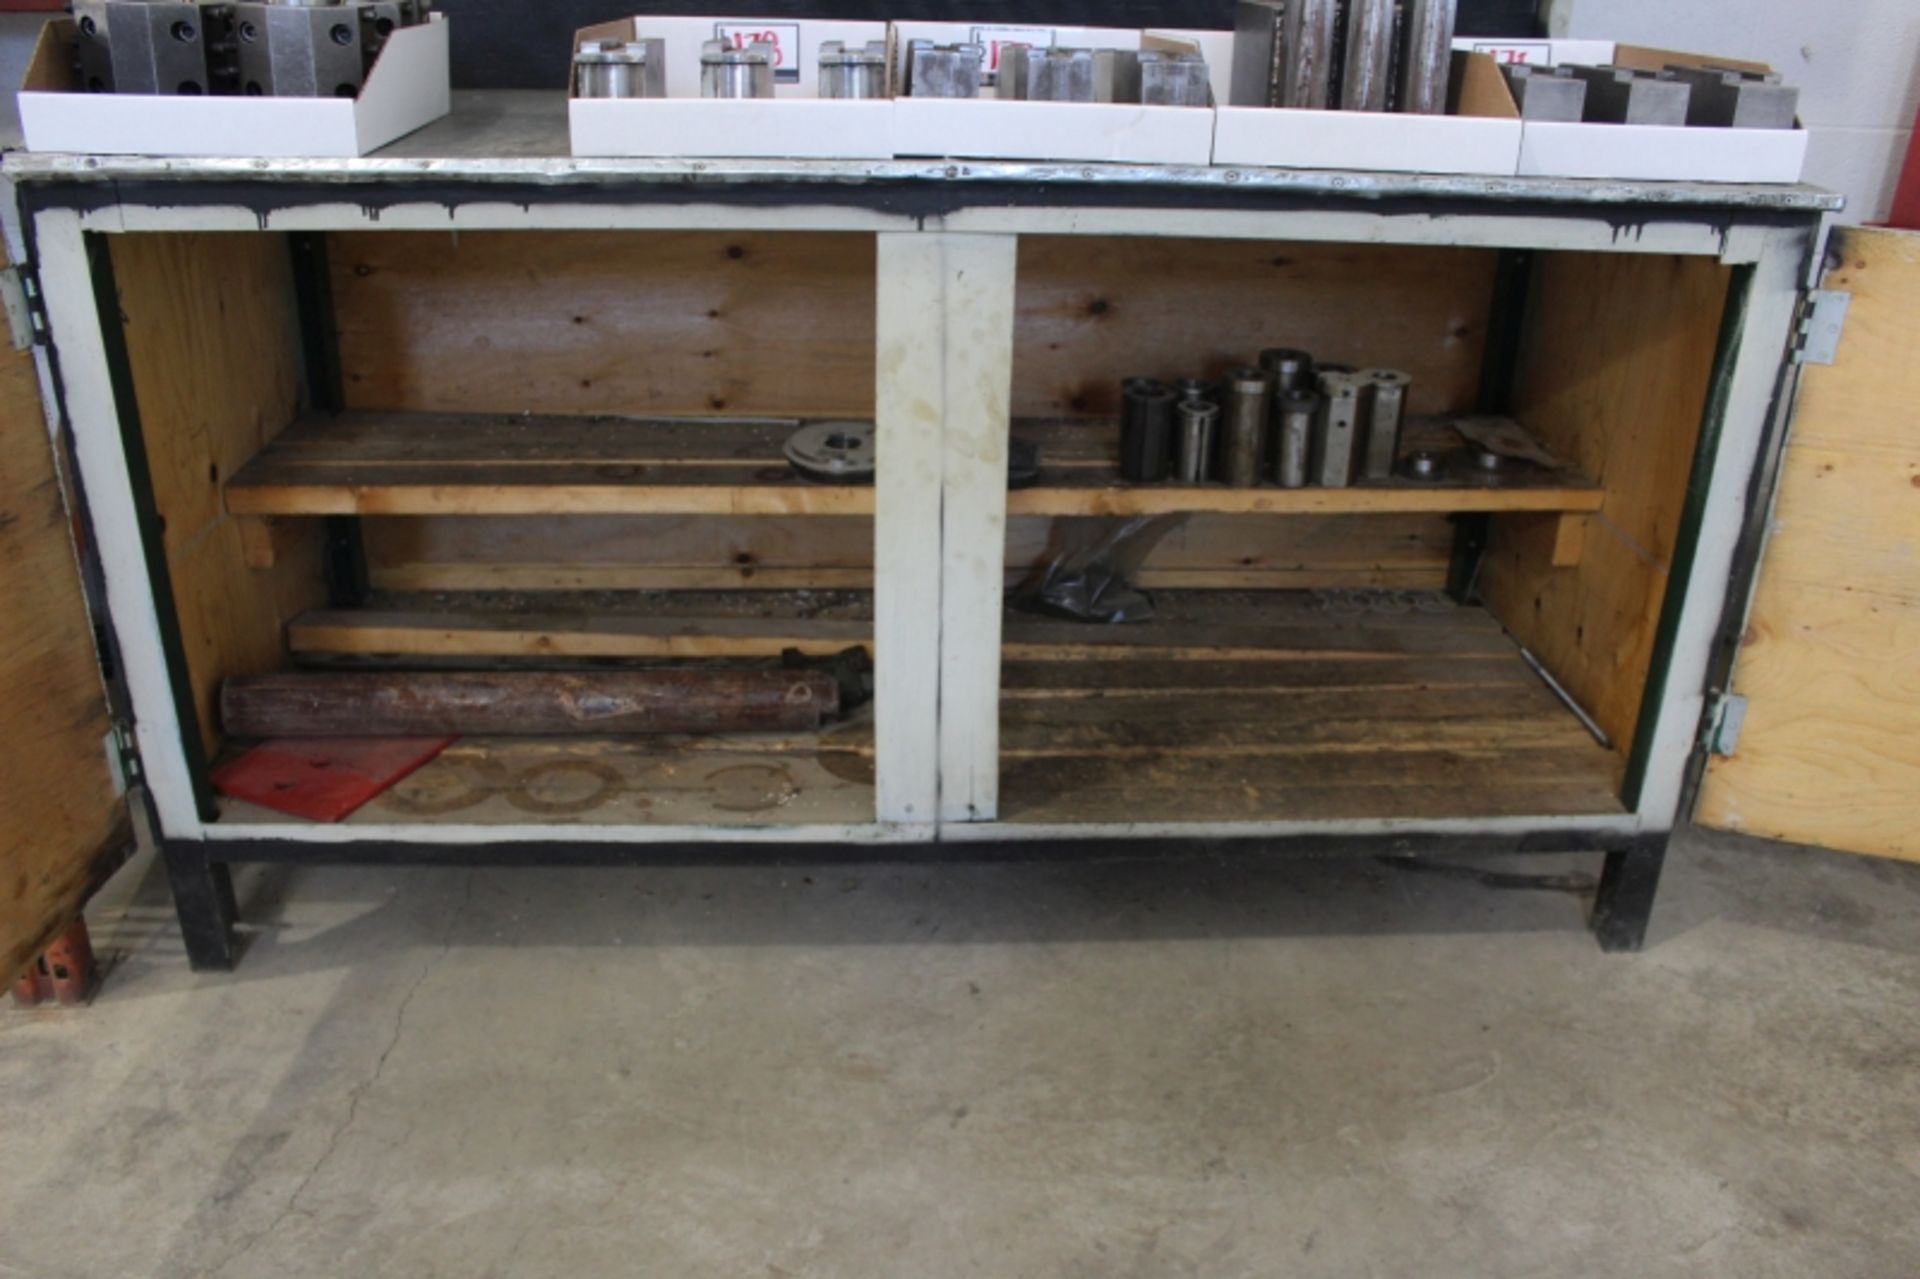 Work Bench with Assorted Sleeves, Boring bar, and Pipe Wrench - Image 2 of 4